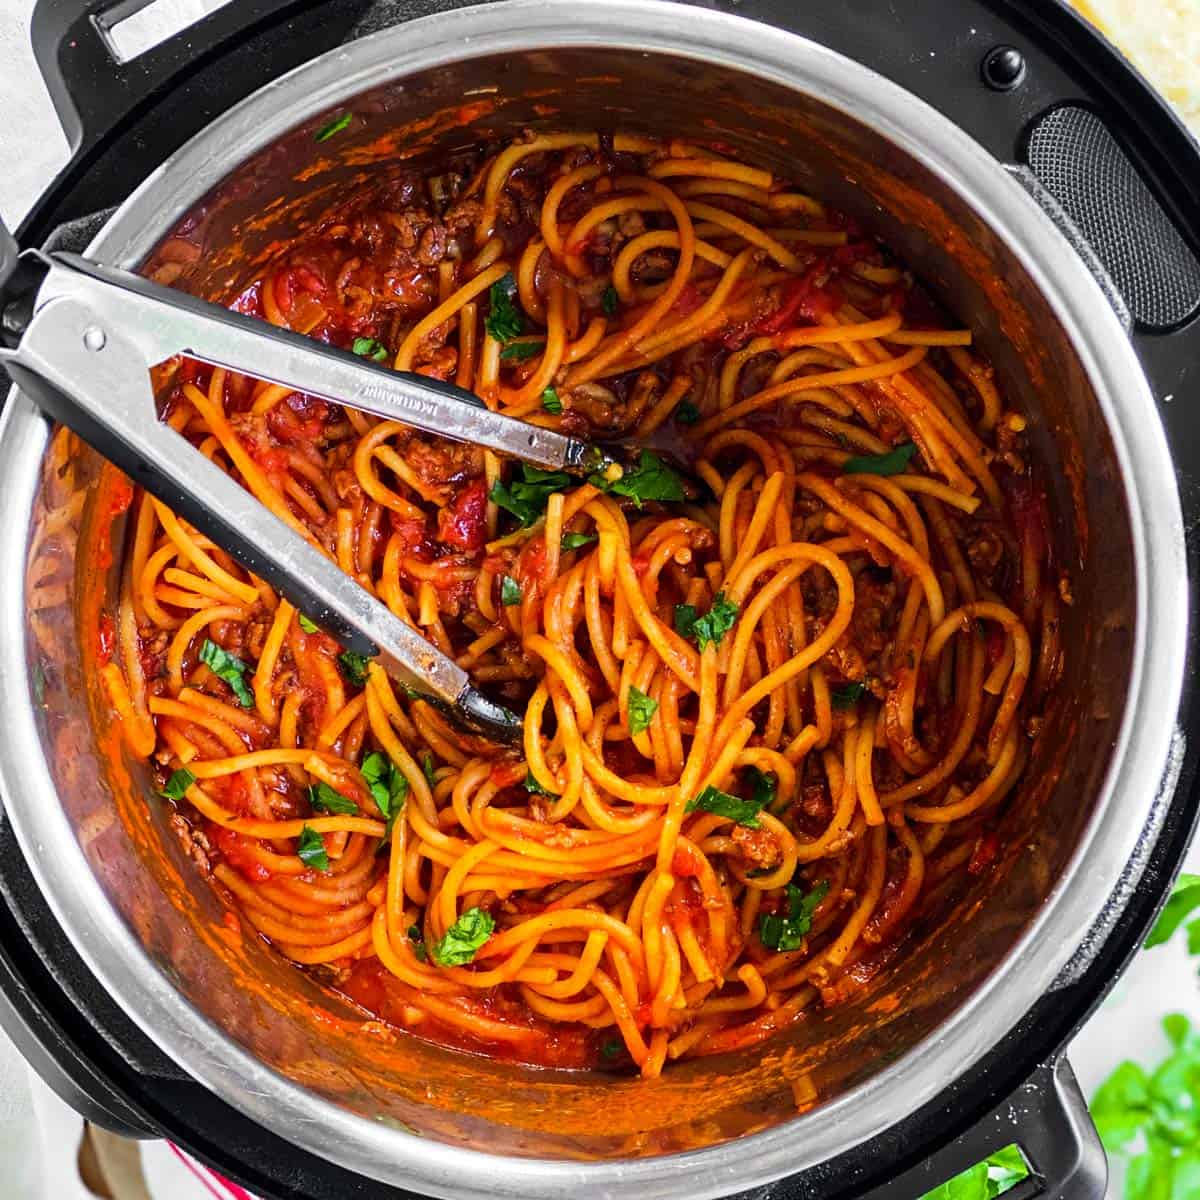 overhead view of instant pot filled with spaghetti and meat sauce with kitchen tongs stuck in